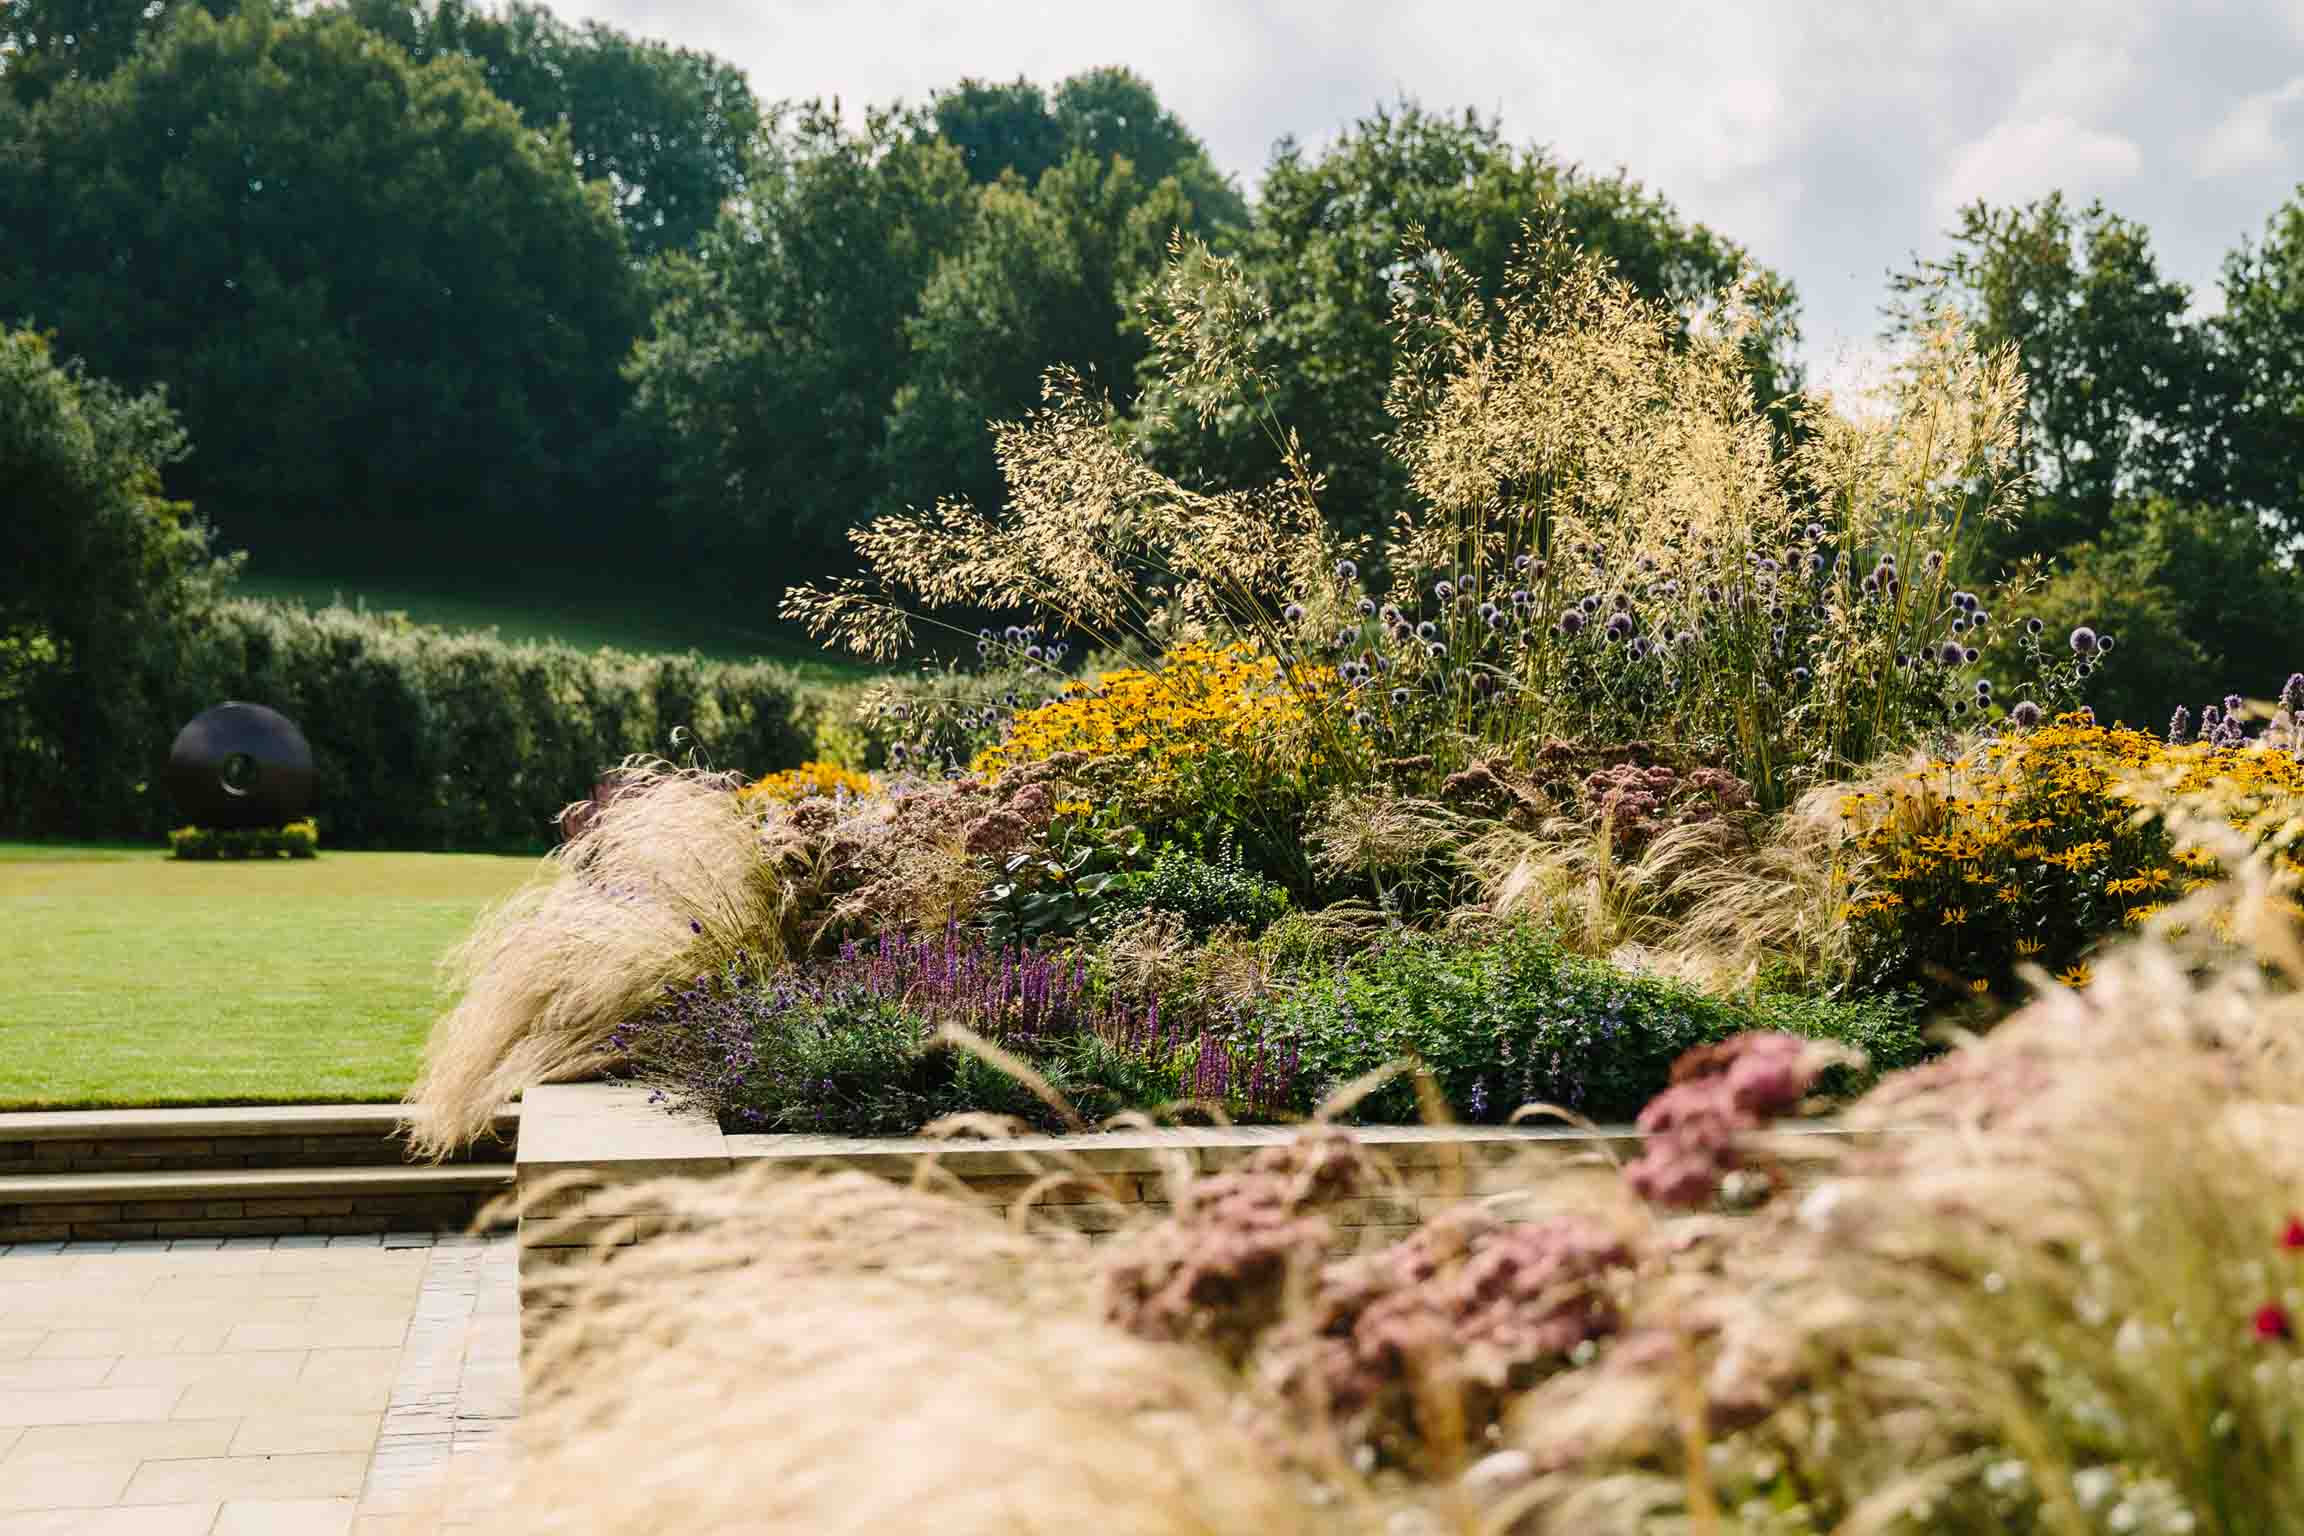 Country Garden-bestall--and-co-yorkshire-modern-planting-dutch-planting Terraced Garden bestall and co Beautiful Planting Planting Design Dry Stone Wall English country classic garden Kat Weatherill